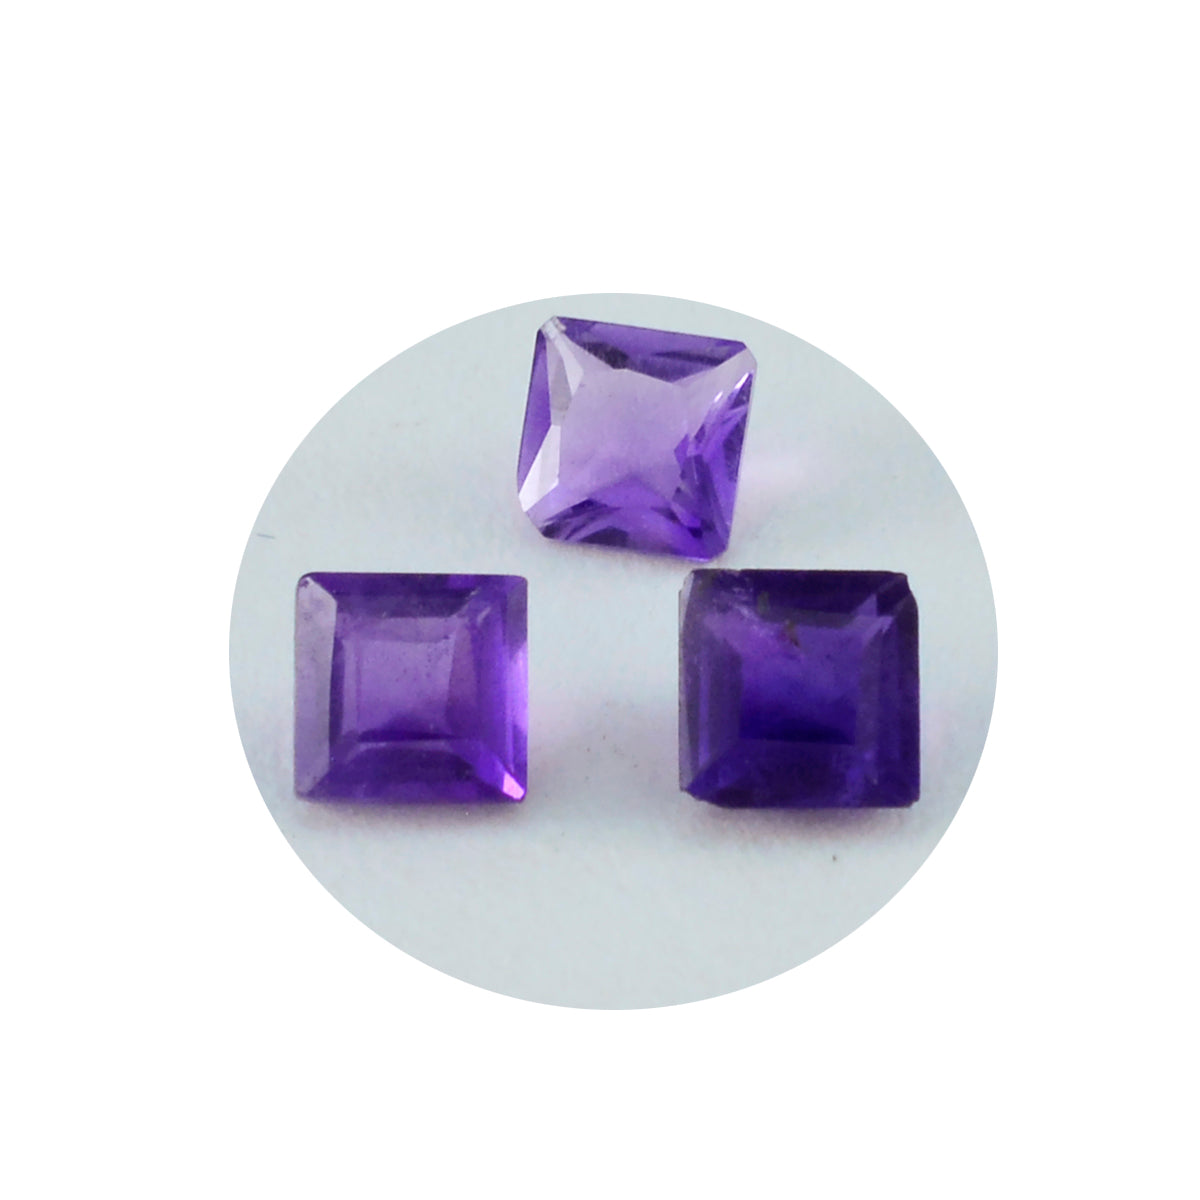 Riyogems 1PC Real Purple Amethyst Faceted 9x9 mm Square Shape attractive Quality Stone